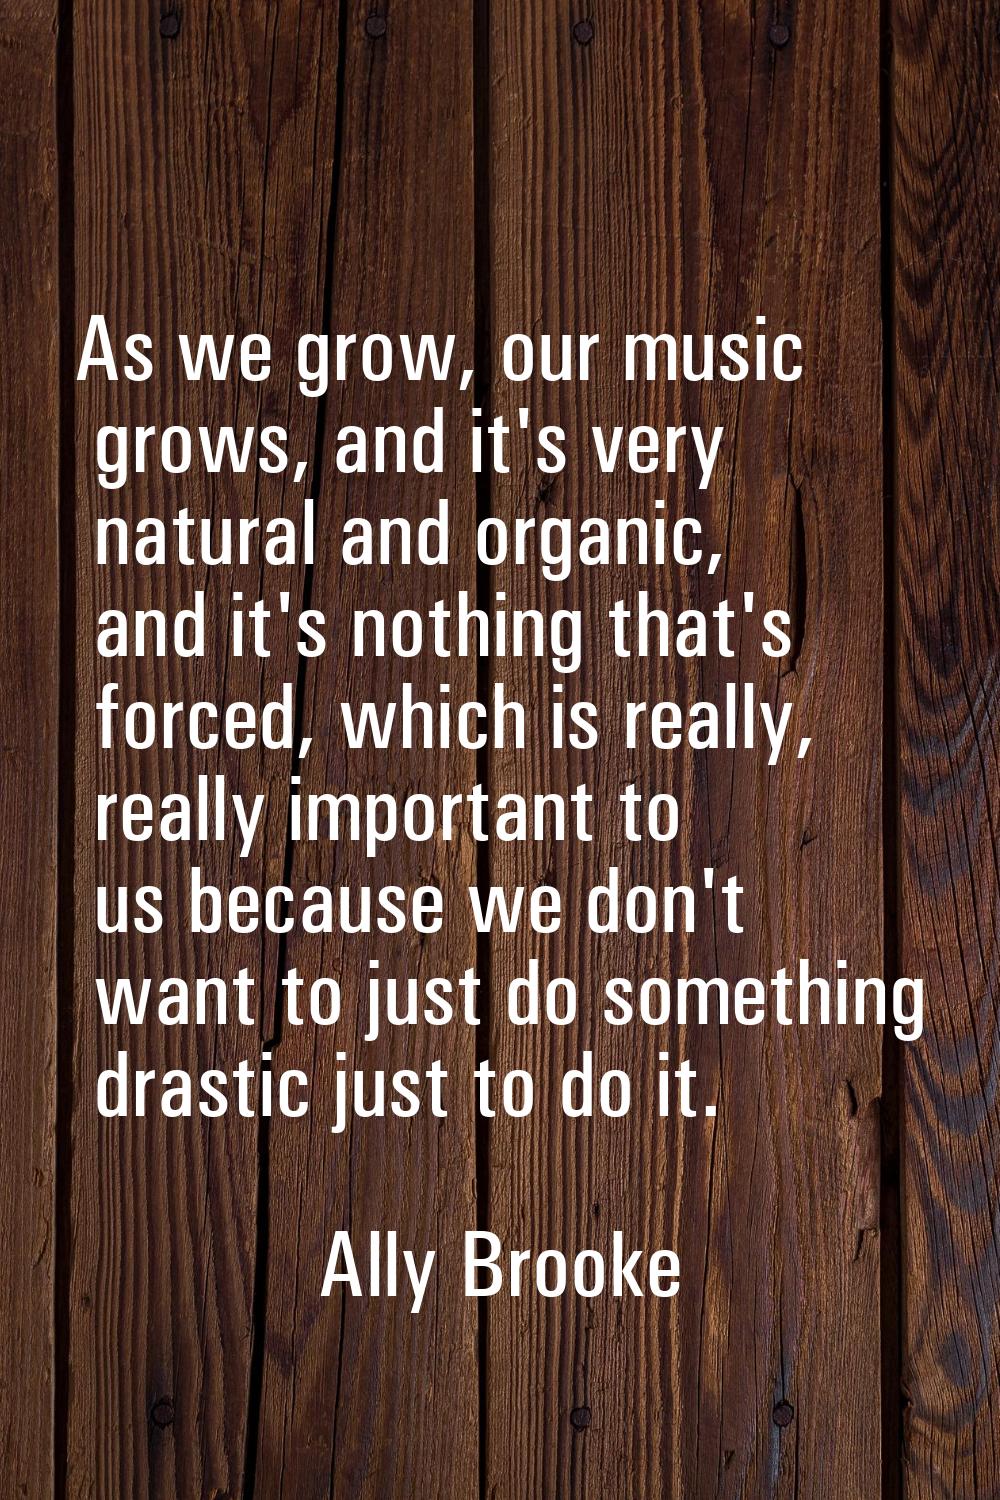 As we grow, our music grows, and it's very natural and organic, and it's nothing that's forced, whi